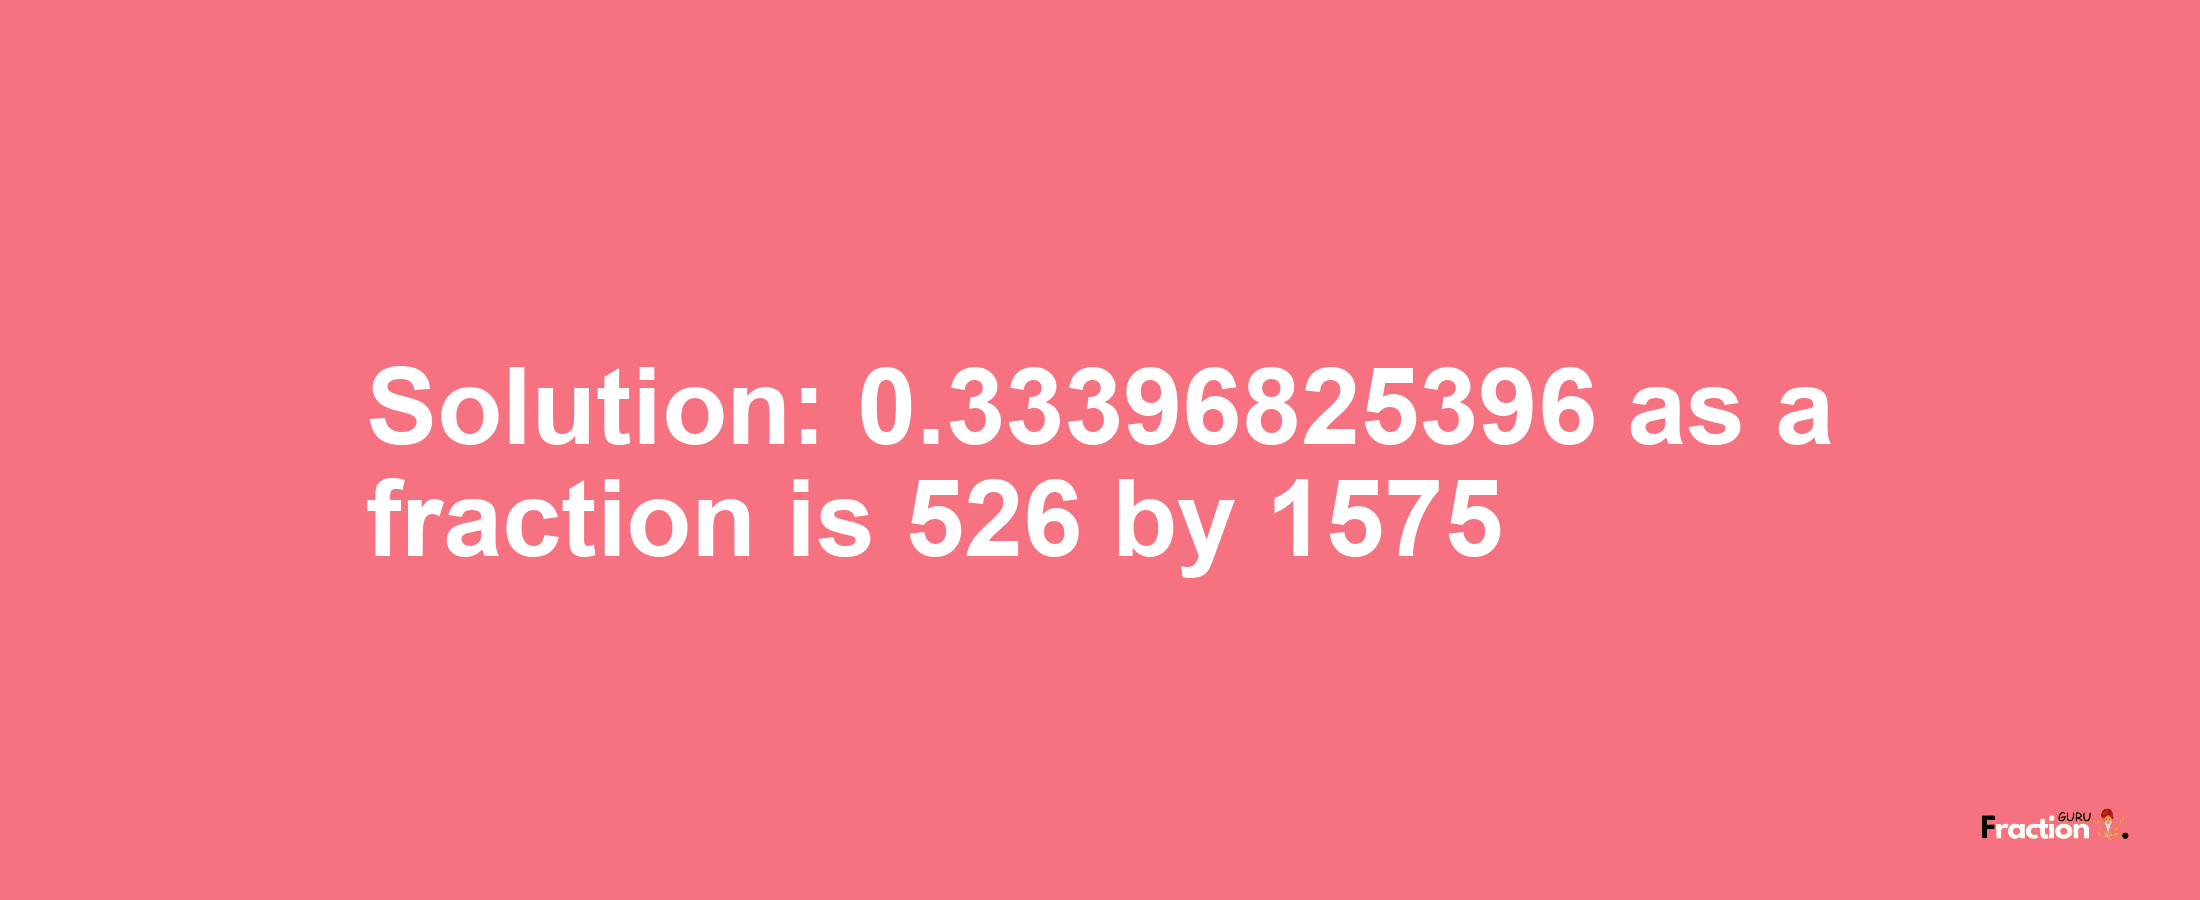 Solution:0.33396825396 as a fraction is 526/1575